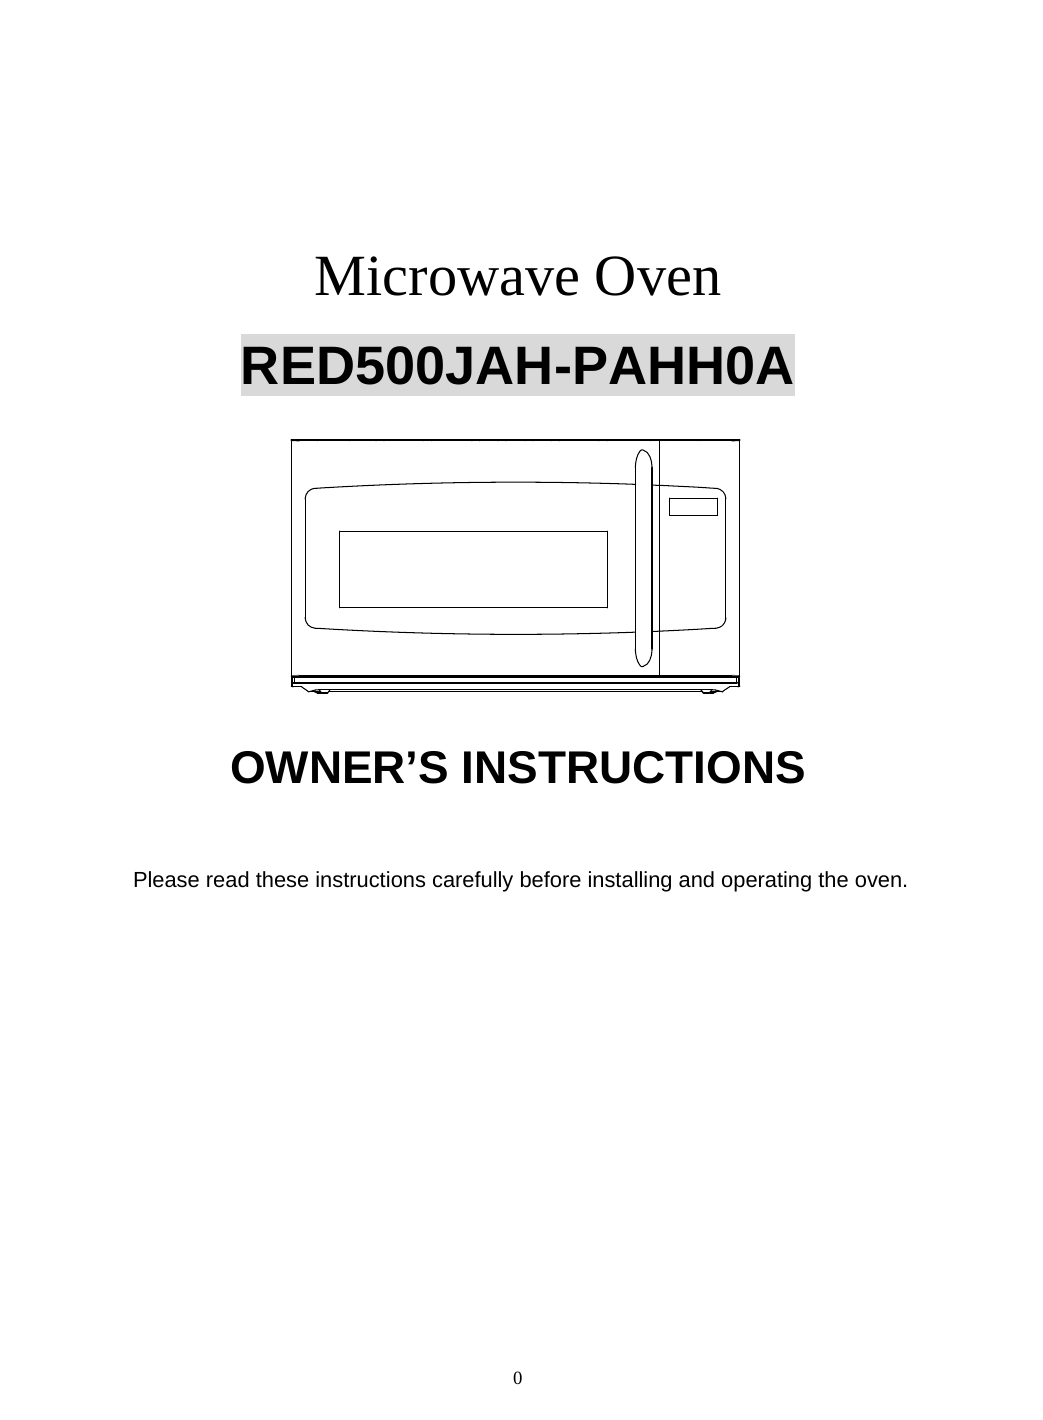 0                                                                                                                    Microwave Oven  RED500JAH-PAHH0A                 OWNER’S INSTRUCTIONS                      Please read these instructions carefully before installing and operating the oven.  